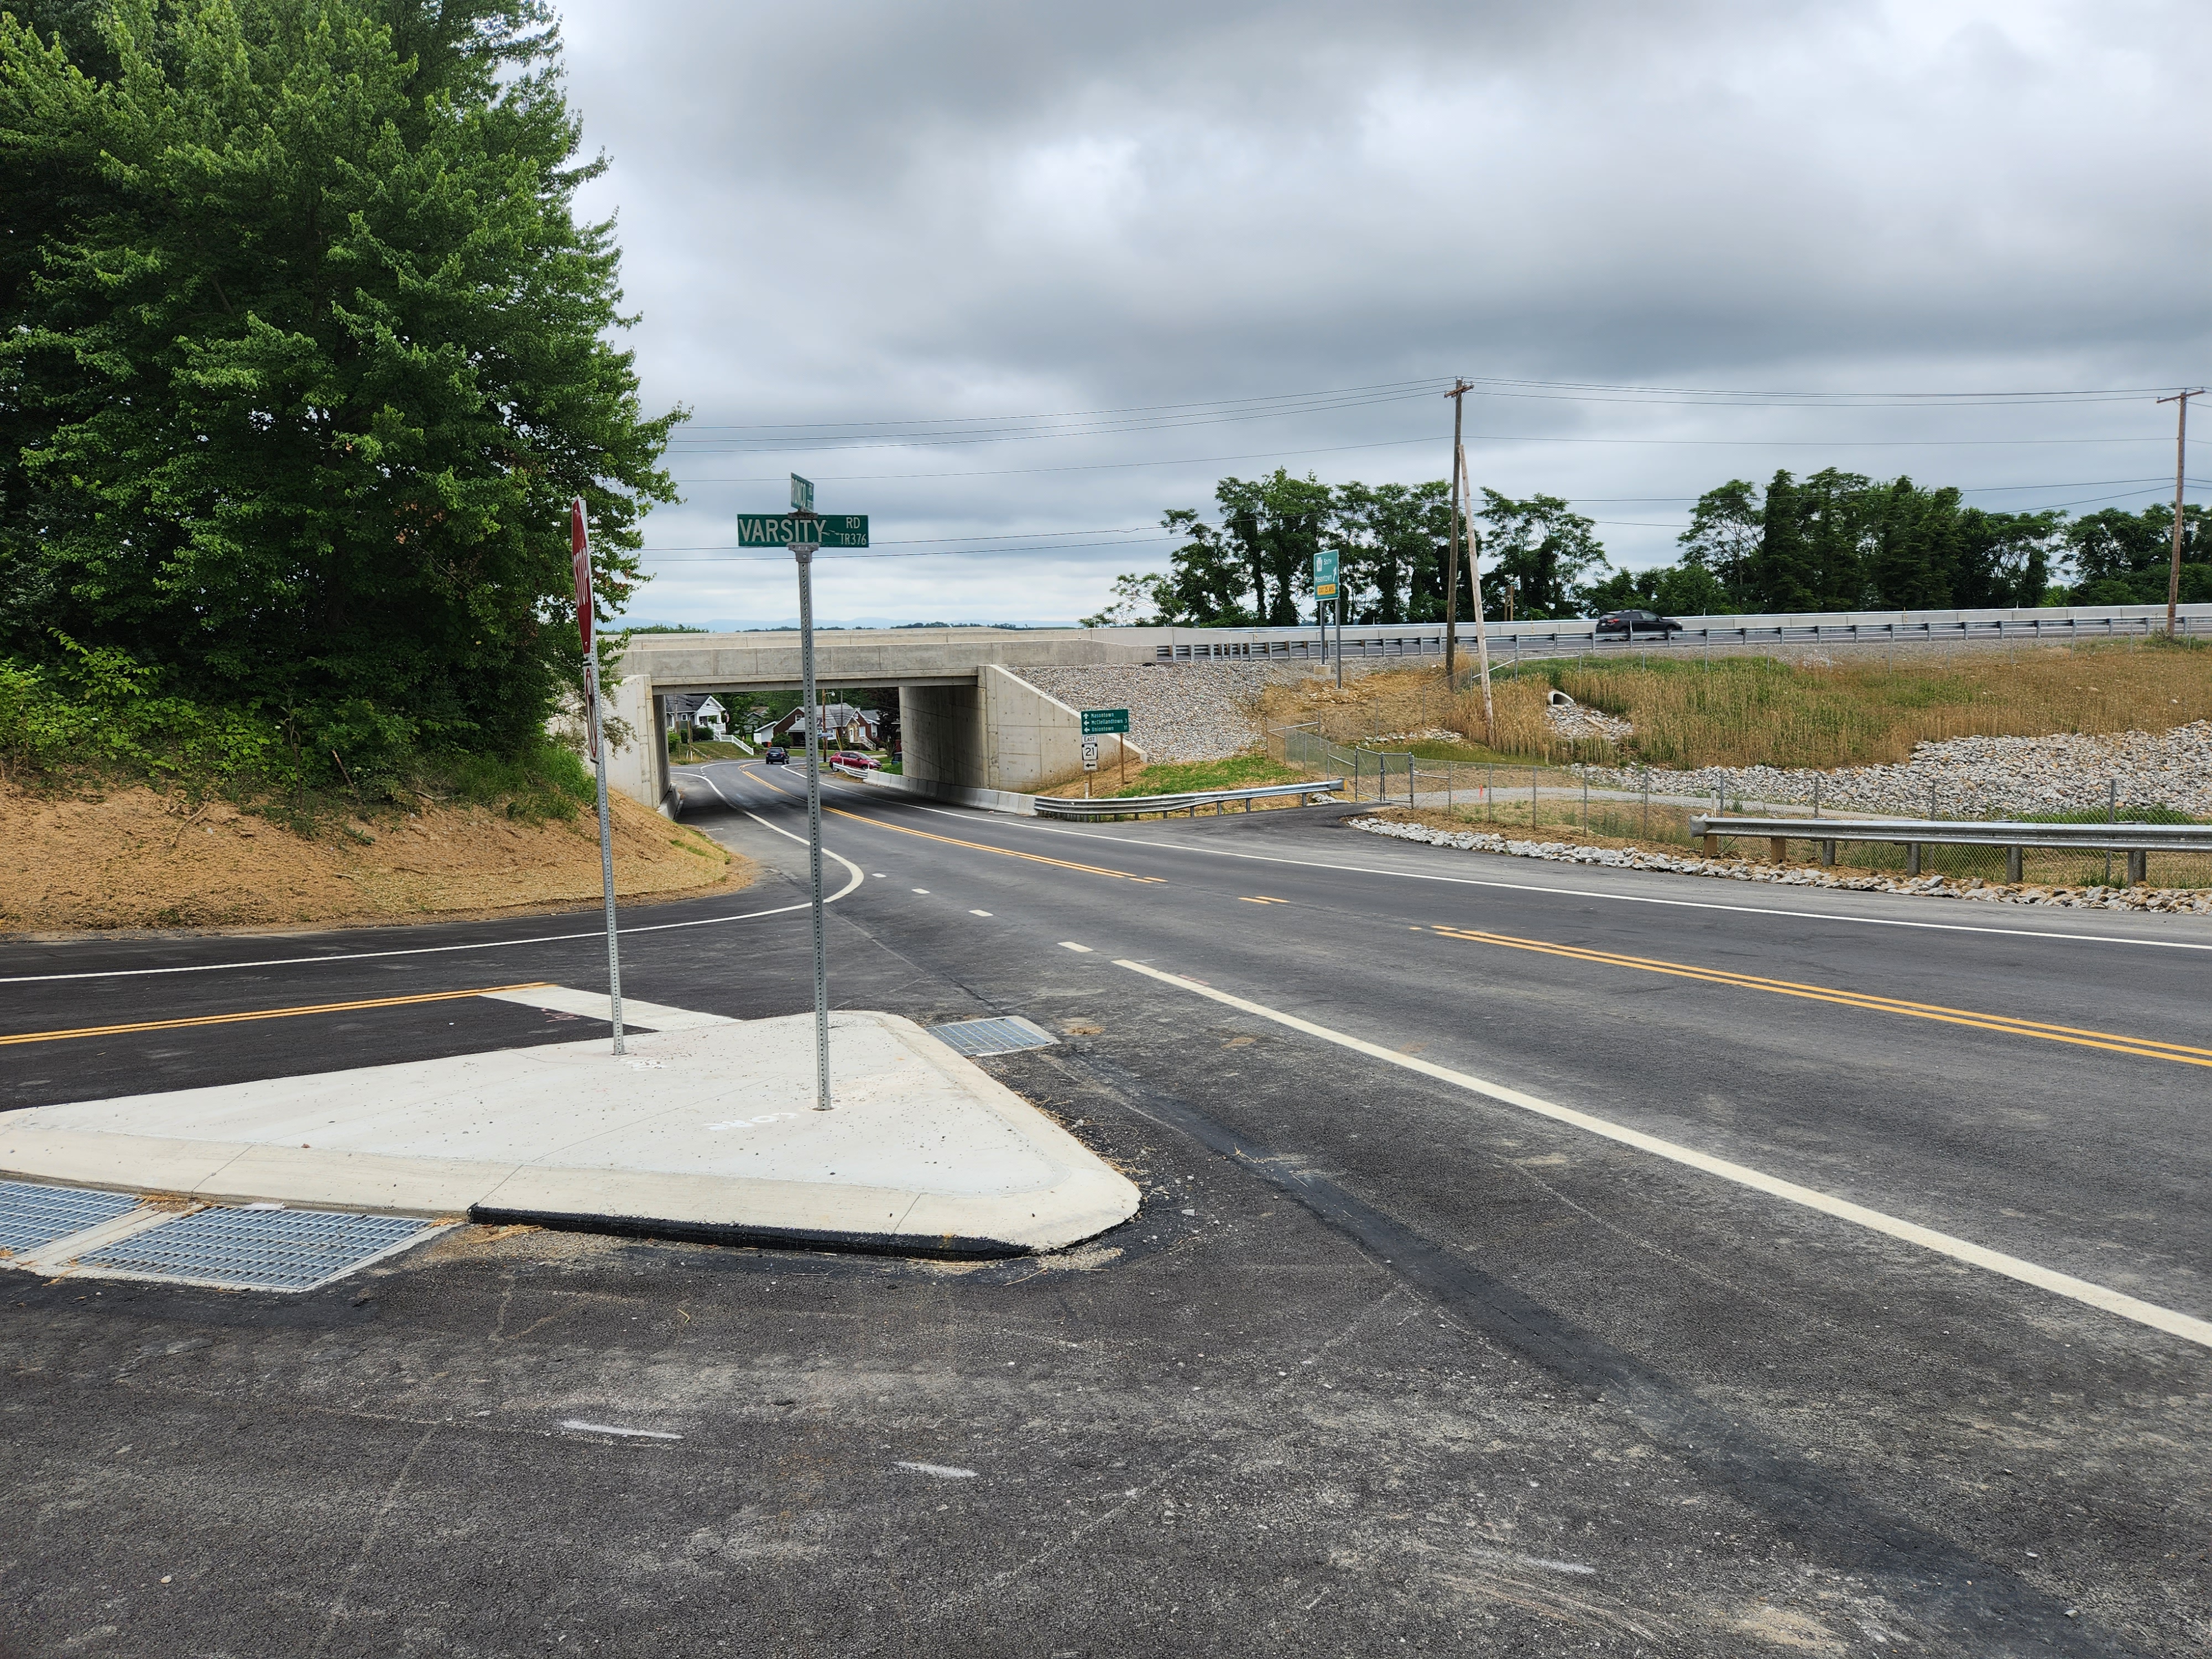 Finished work on Route 166 southbound under Route 21